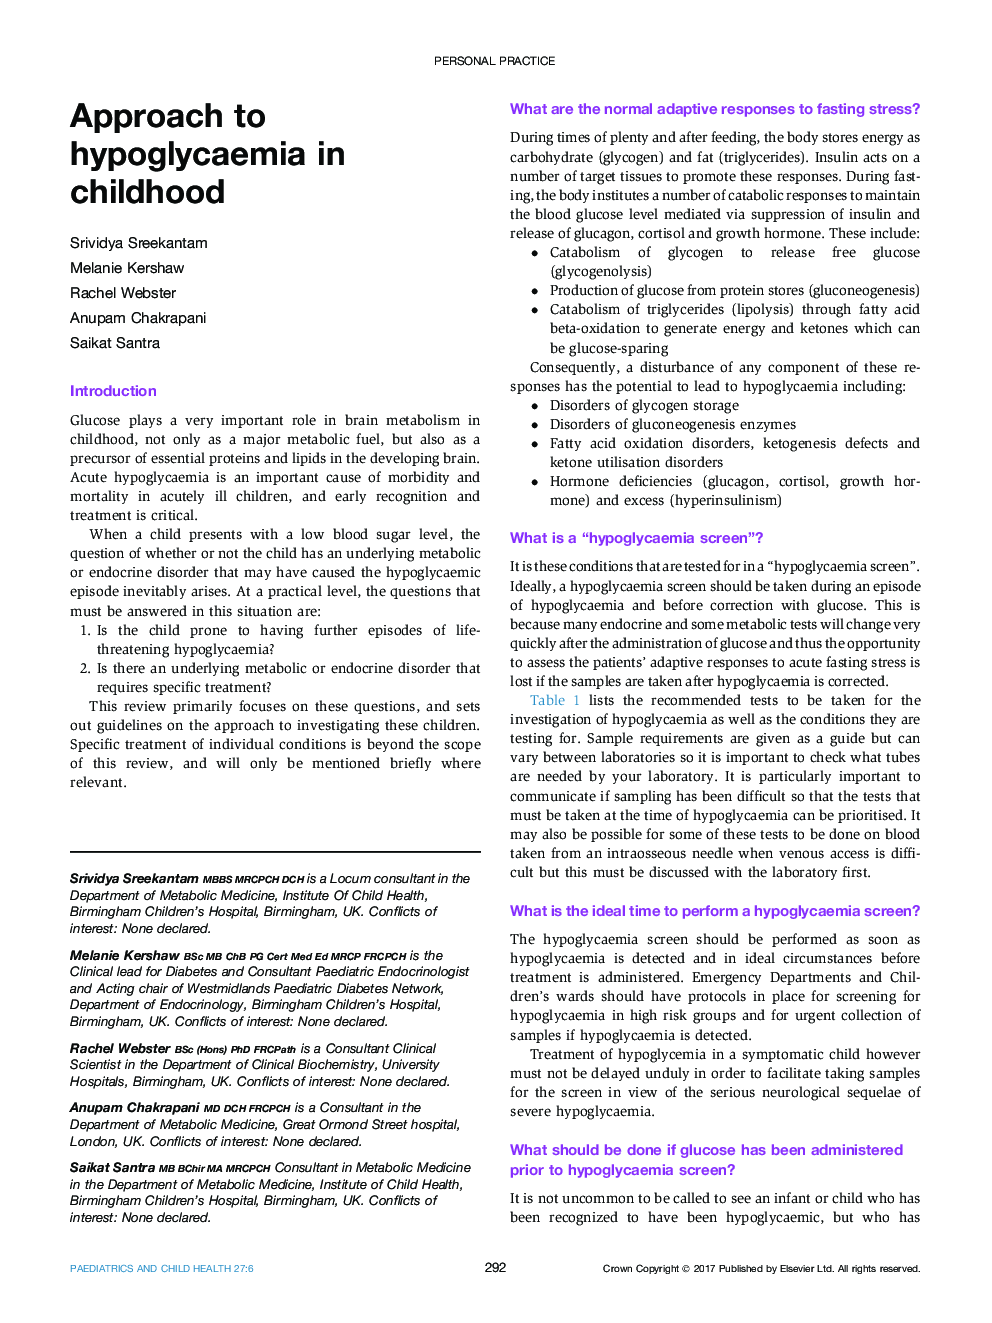 Approach to hypoglycaemia in childhood